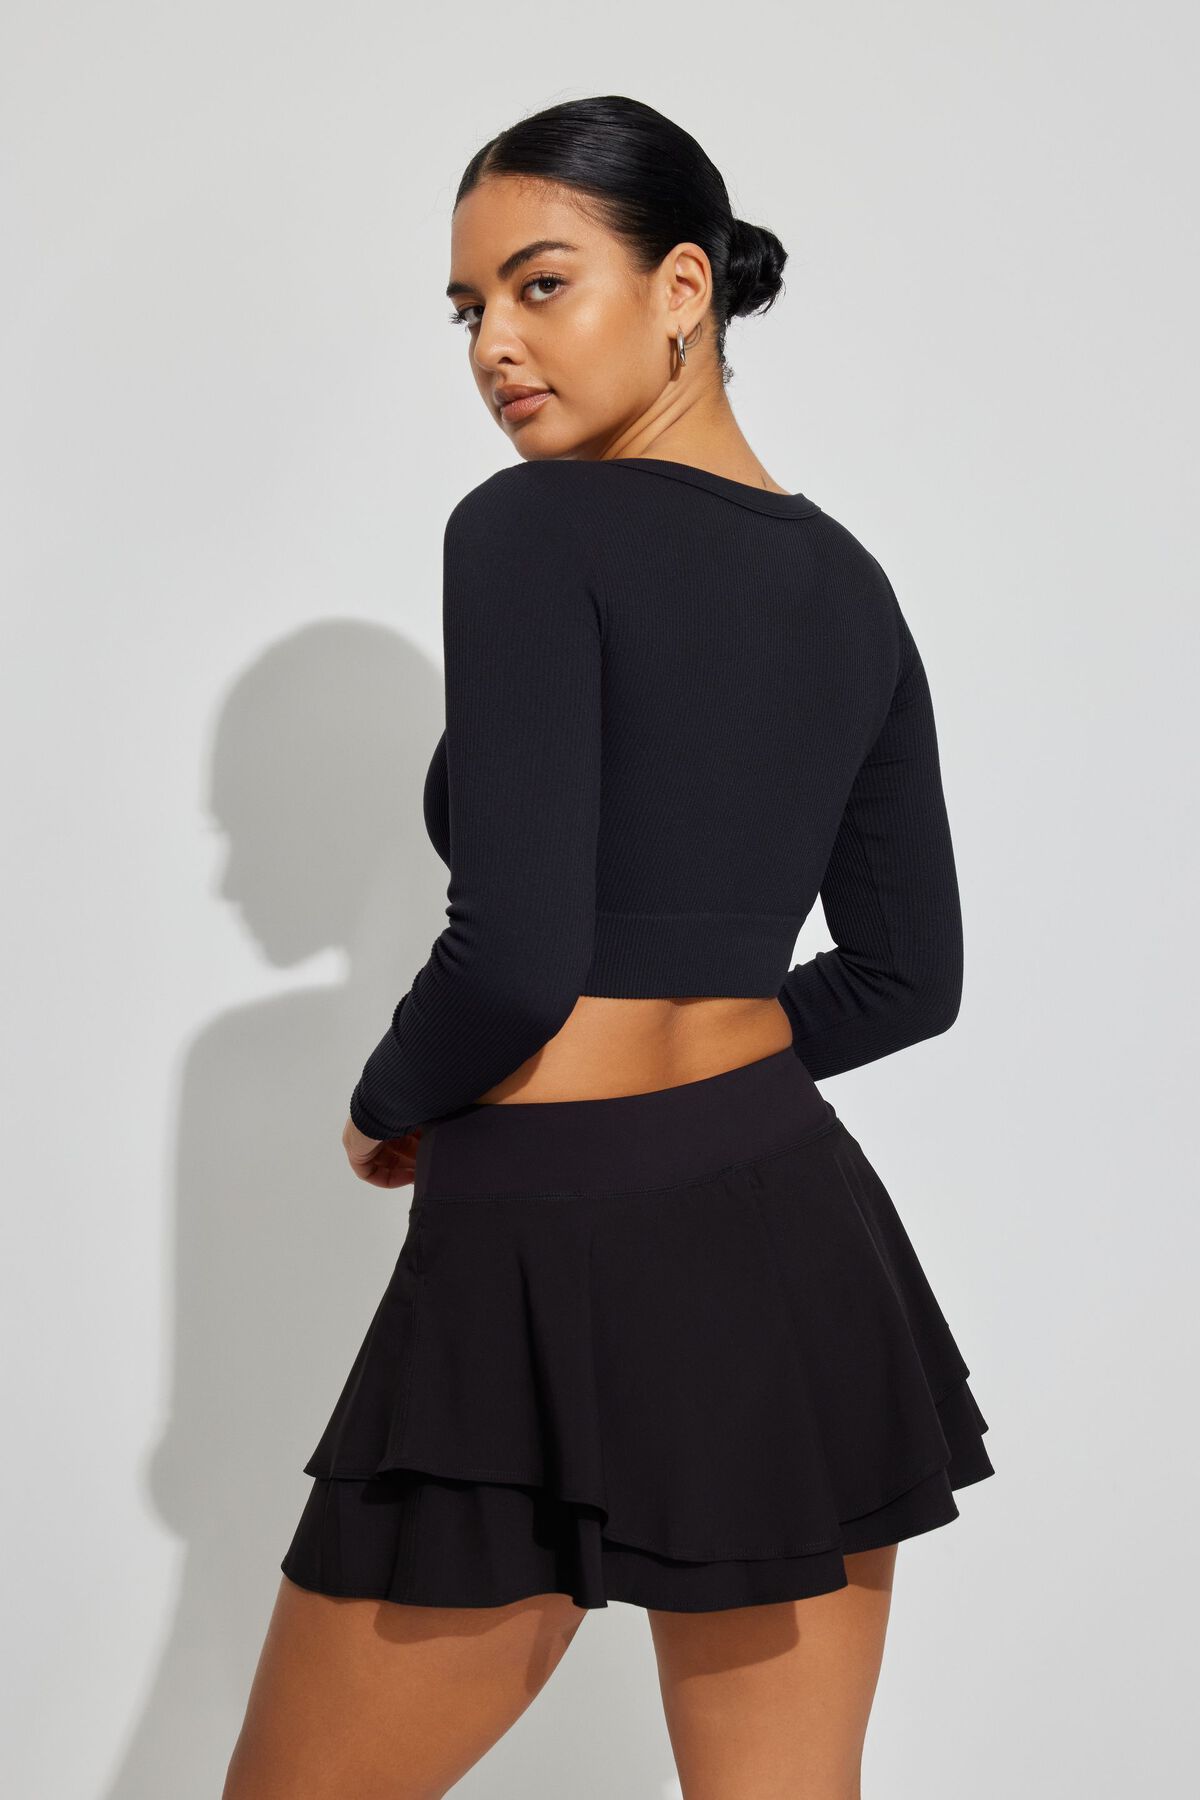 FLARE ATHLETIC SKORT – The Refinery